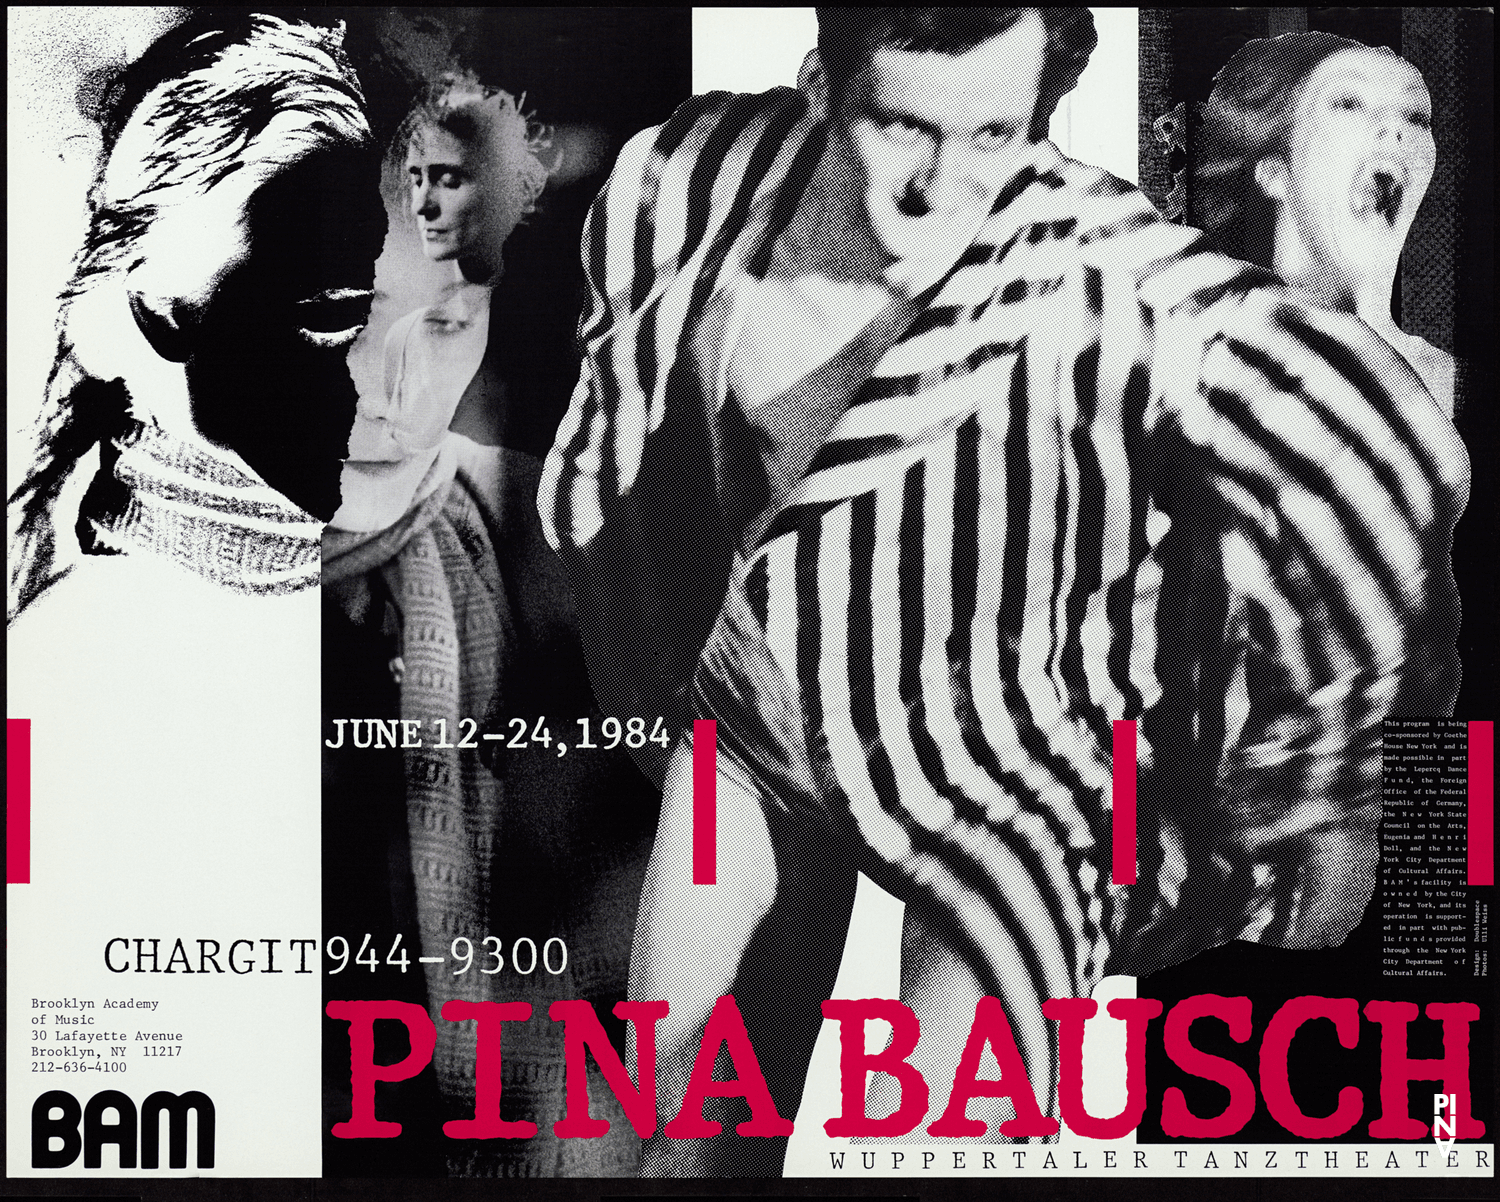 Poster for “1980 – A Piece by Pina Bausch”, “Auf dem Gebirge hat man ein Geschrei gehört (On the Mountain a Cry Was Heard)”, “Bluebeard. While Listening to a Tape Recording of Béla Bartók's Opera "Duke Bluebeard's Castle"”, “Café Müller” and “The Rite of Spring” by Pina Bausch in New York and Wuppertal, 06/12/1984 – 06/24/1984